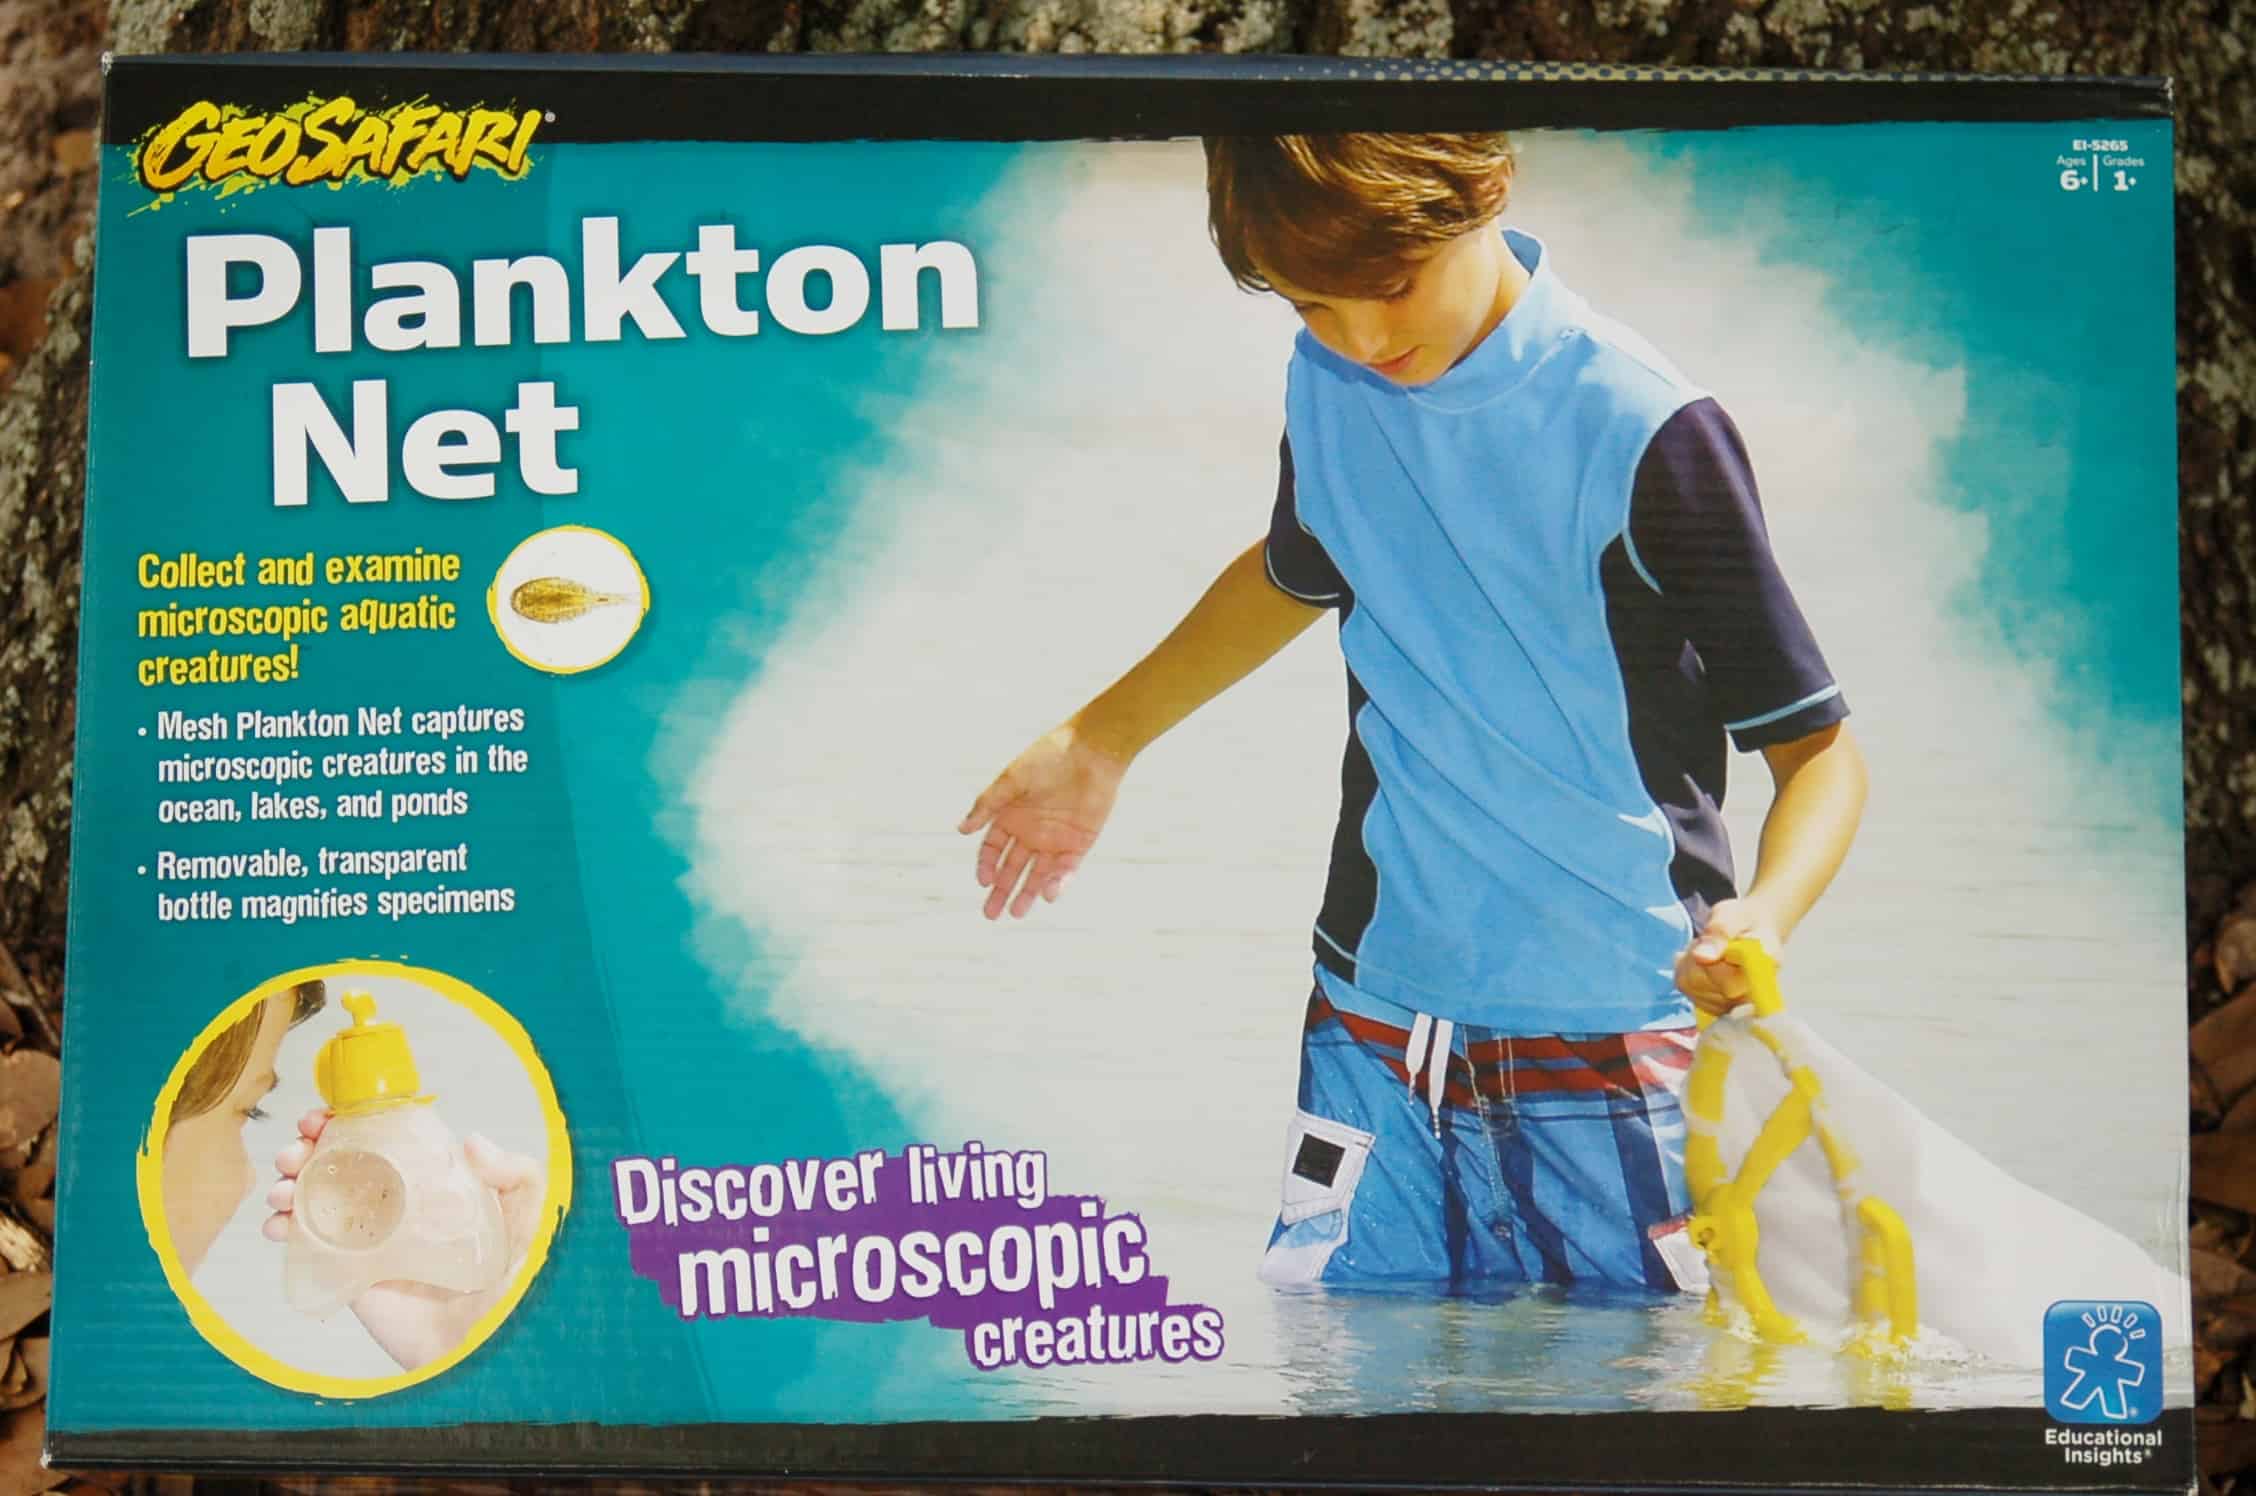 GeoSafari Plankton Net Science Product Review for Kids